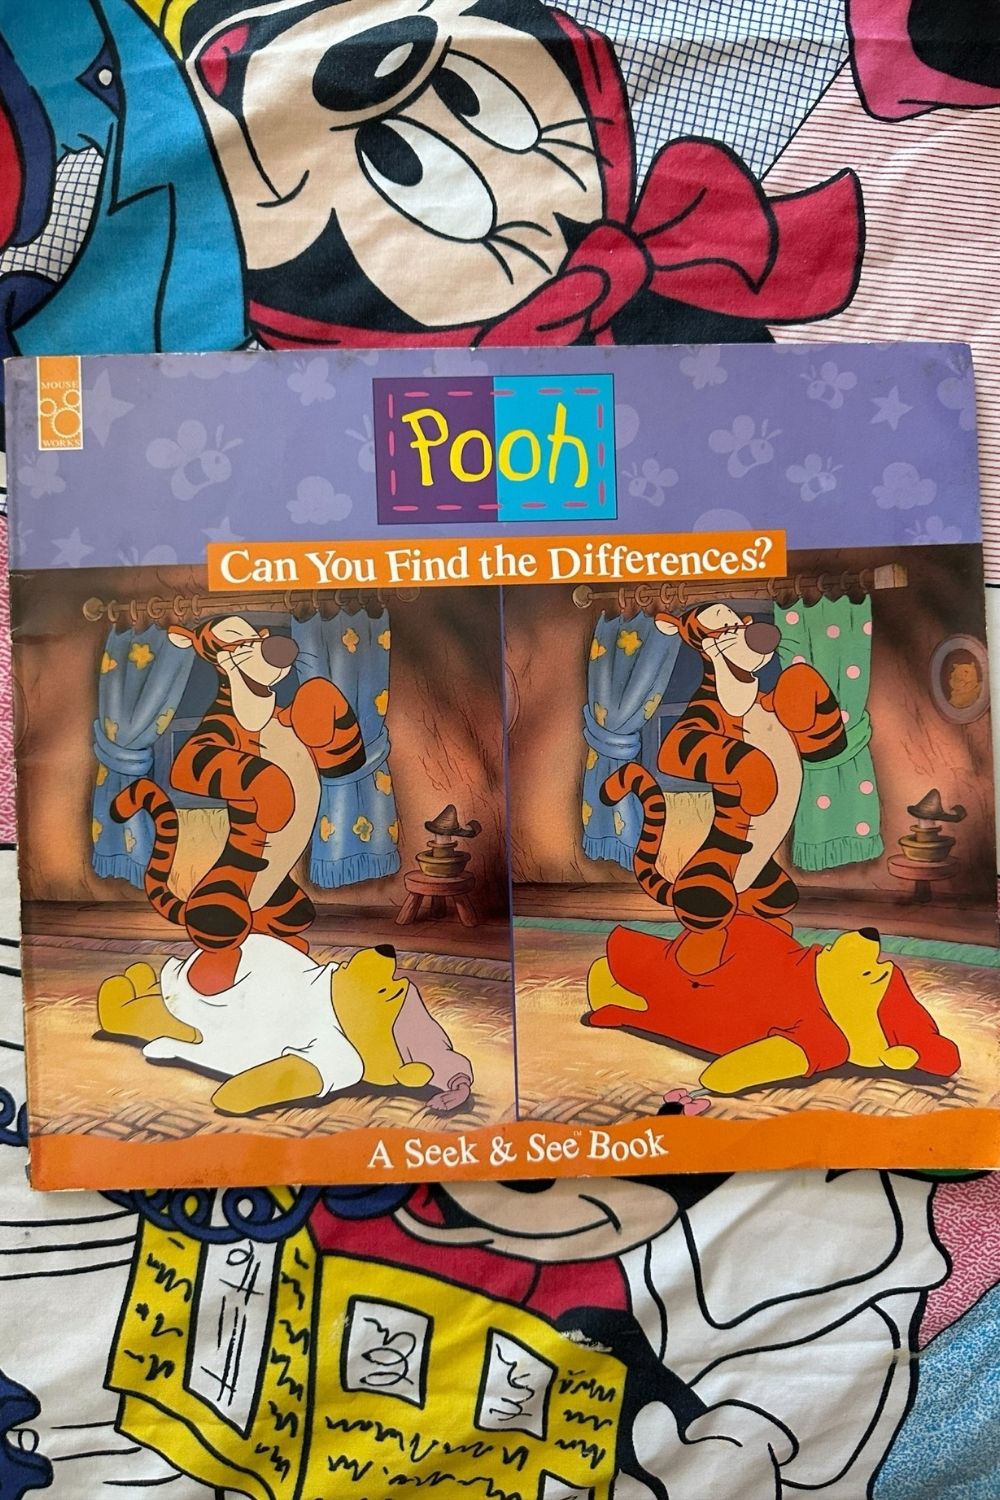 POOH CAN YOU FIND THE DIFFERENCES BOOK*